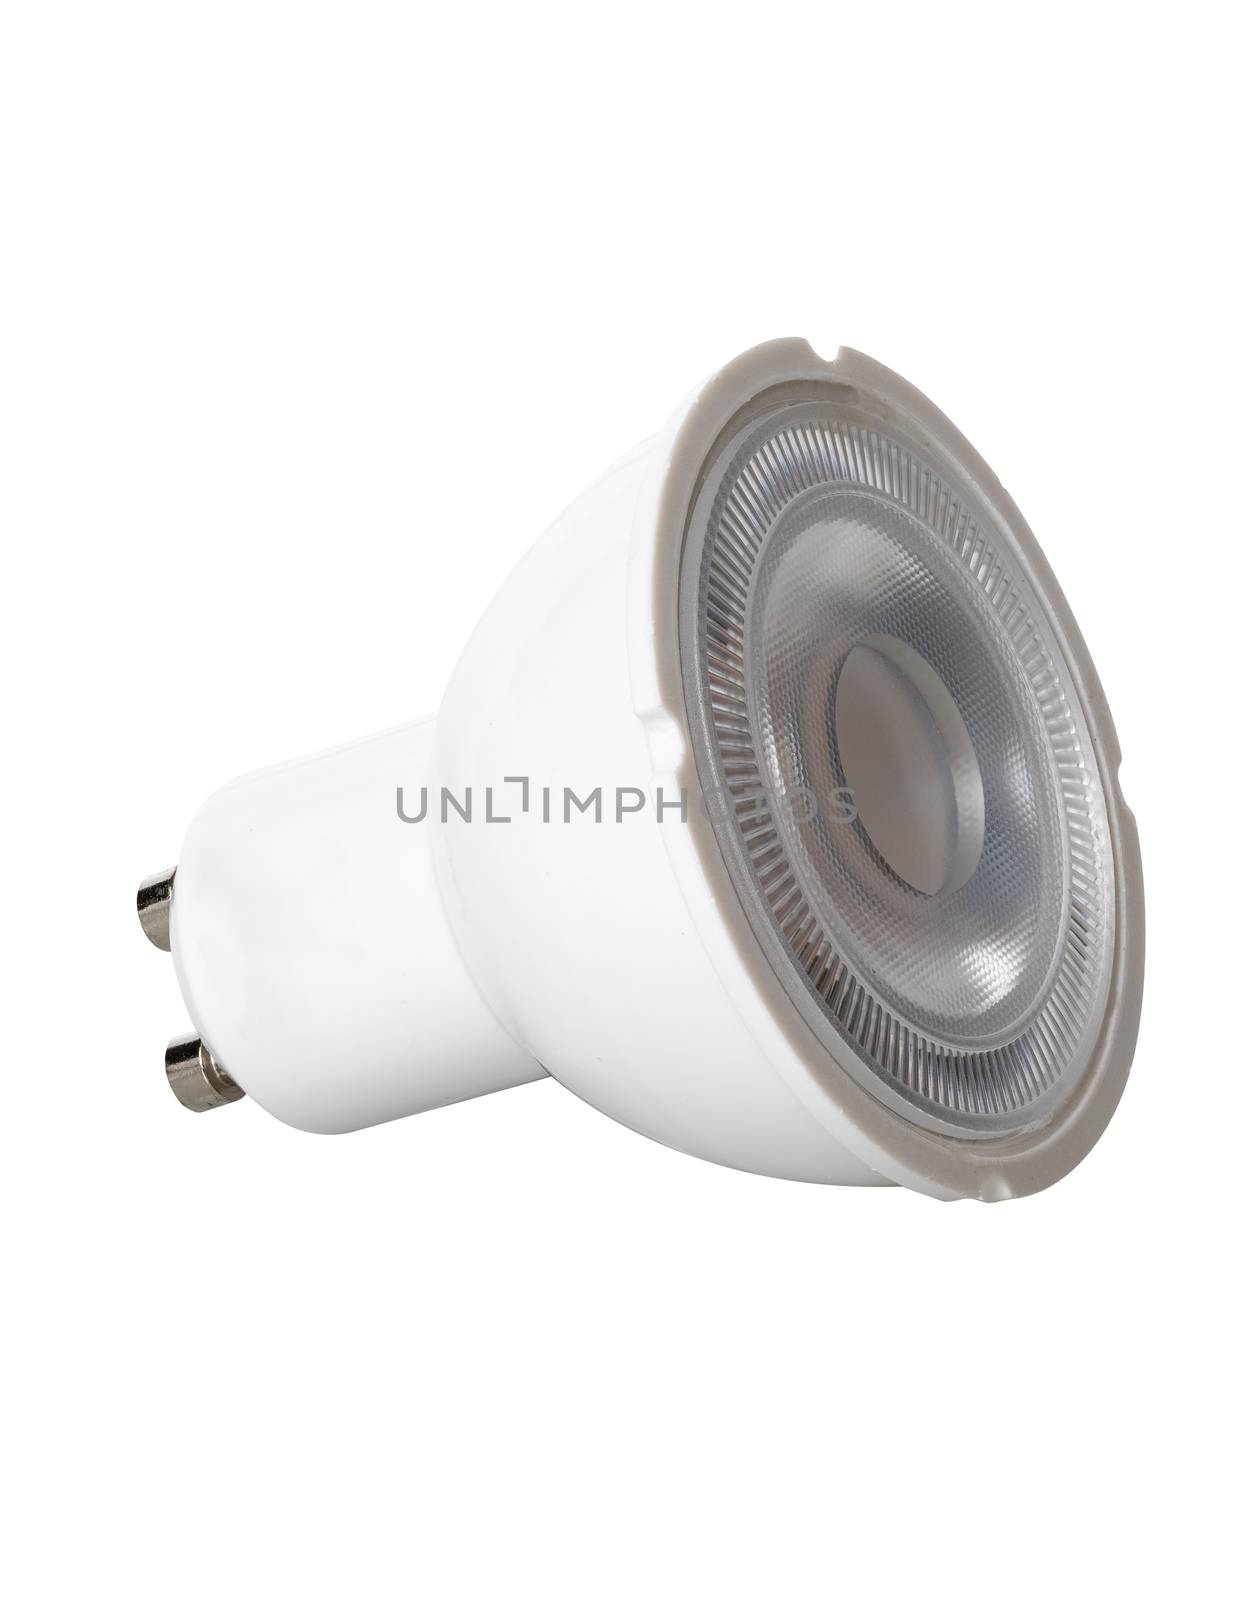 Isolated LED spotlight bulb with GU10 style connector for UK lamps by steheap